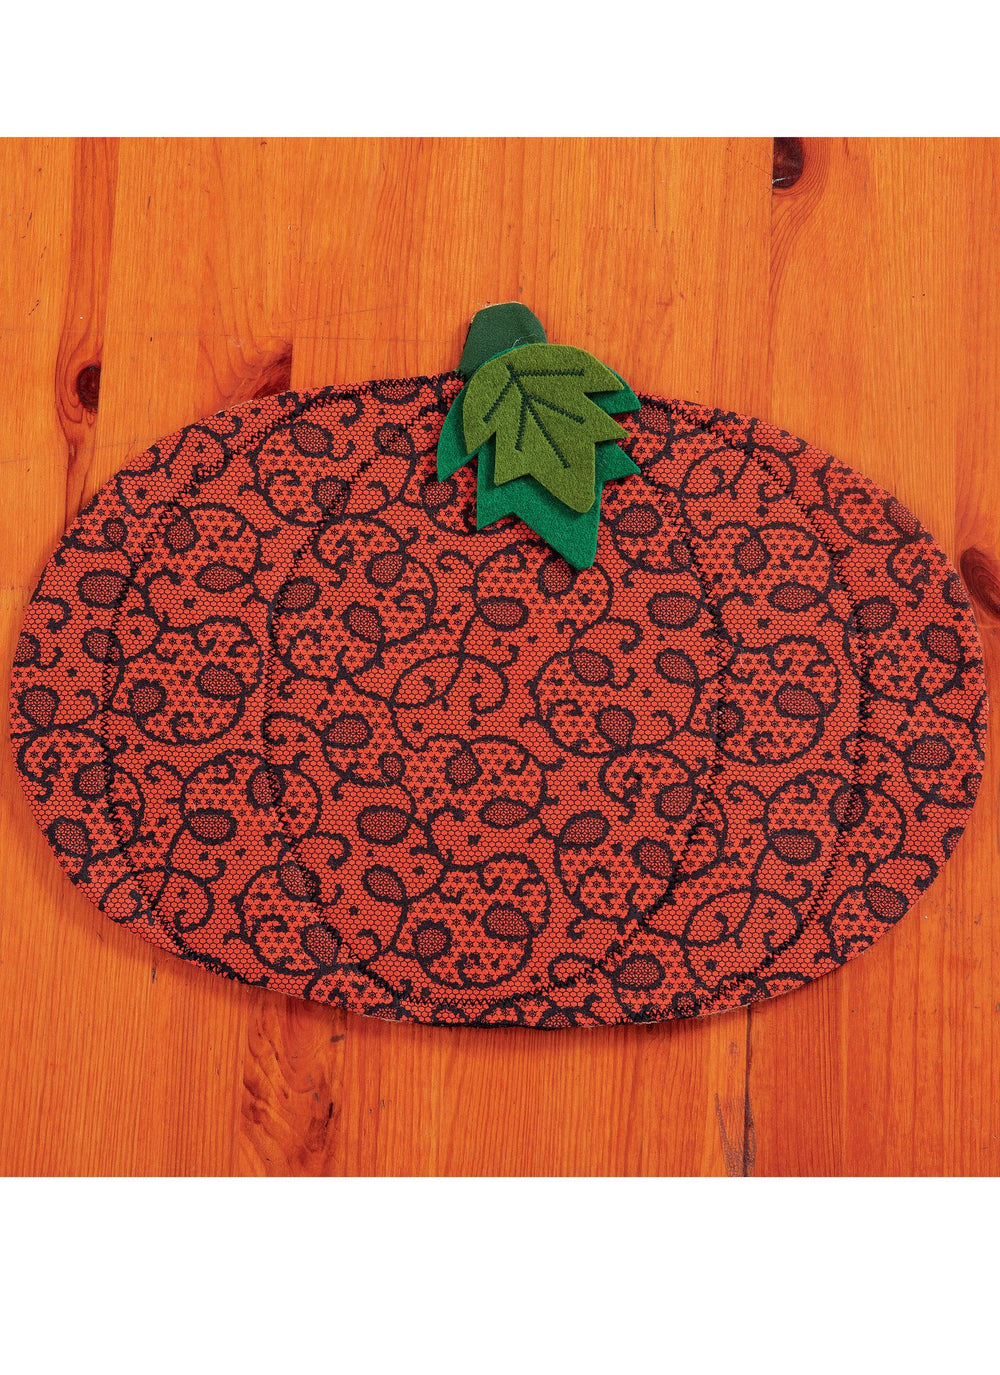 M7490 Pumpkin Placemats/Table Runner, Witch Hat/Legs, and Wreaths from Jaycotts Sewing Supplies